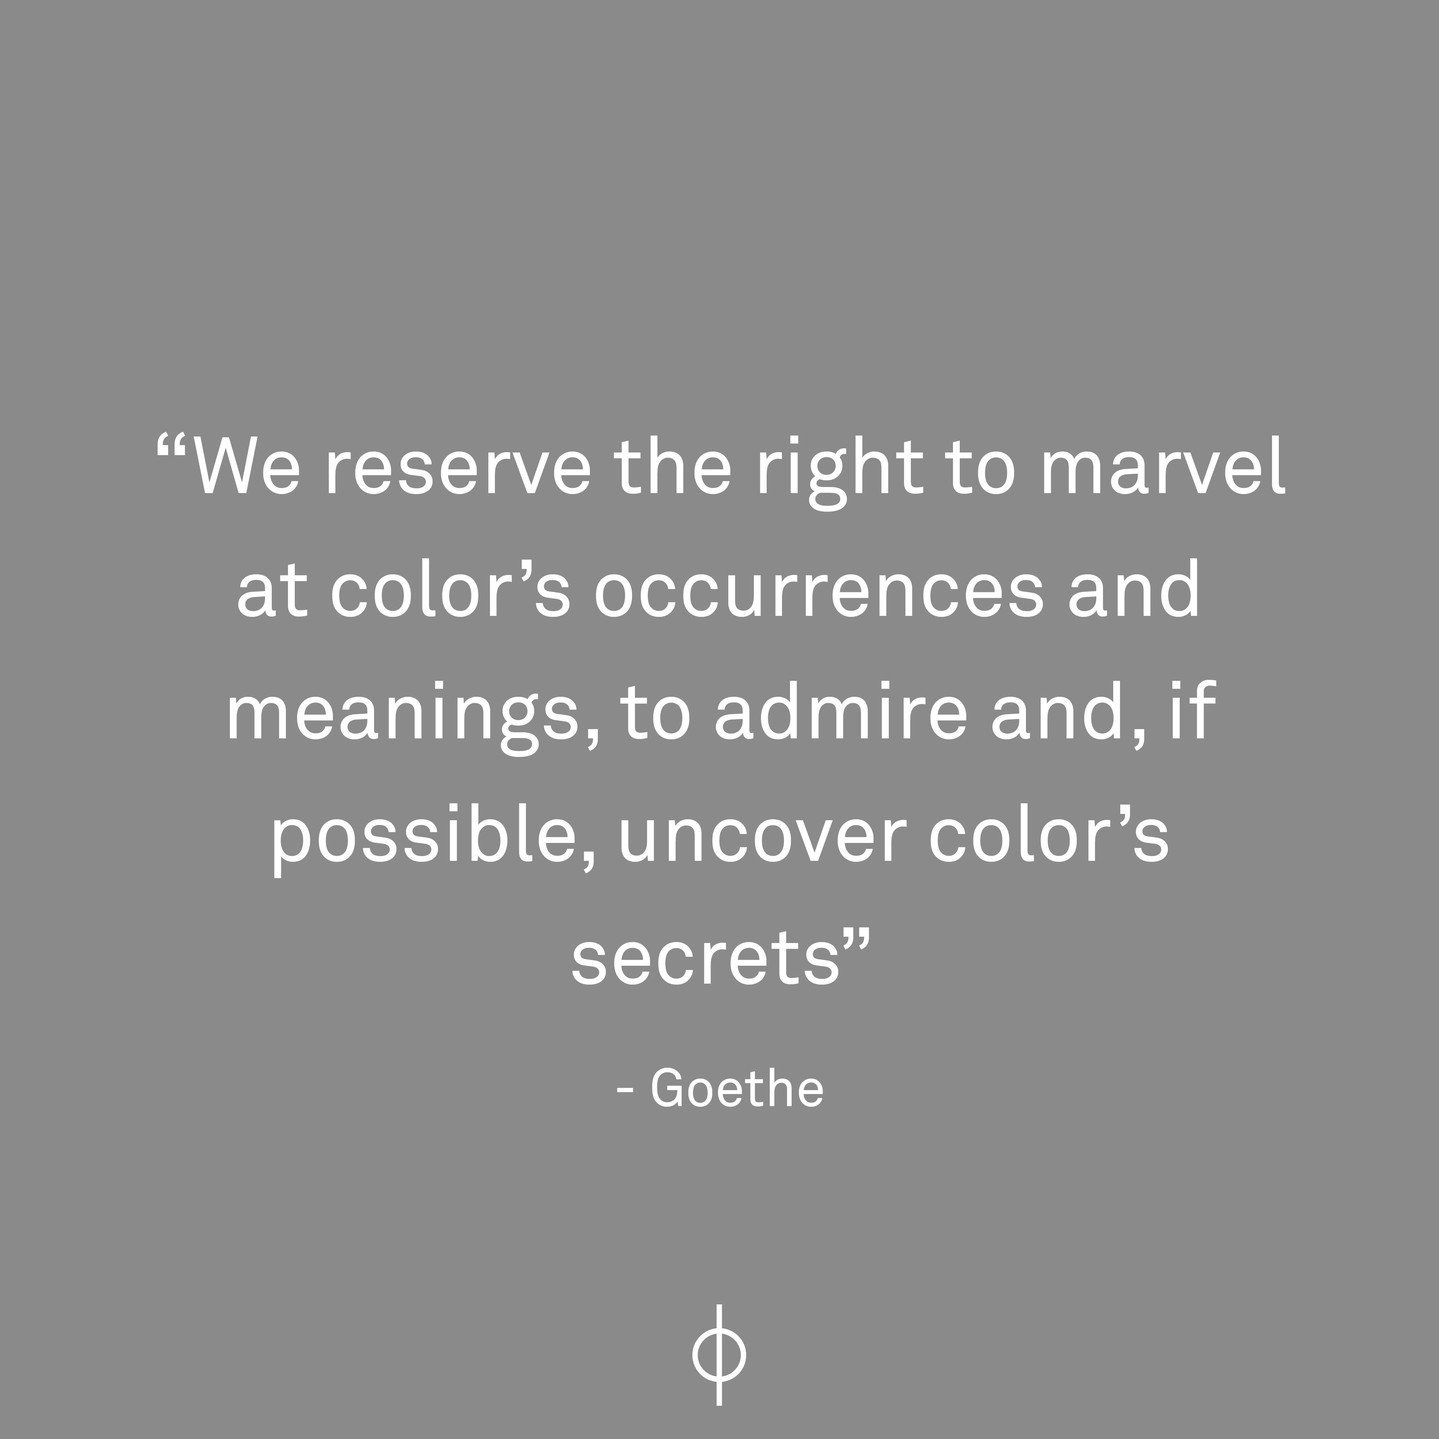 We reserve the right to marvel at color&rsquo;s occurrences and meanings, to admire and, if possible, uncover color&rsquo;s secrets. 

- Goethe